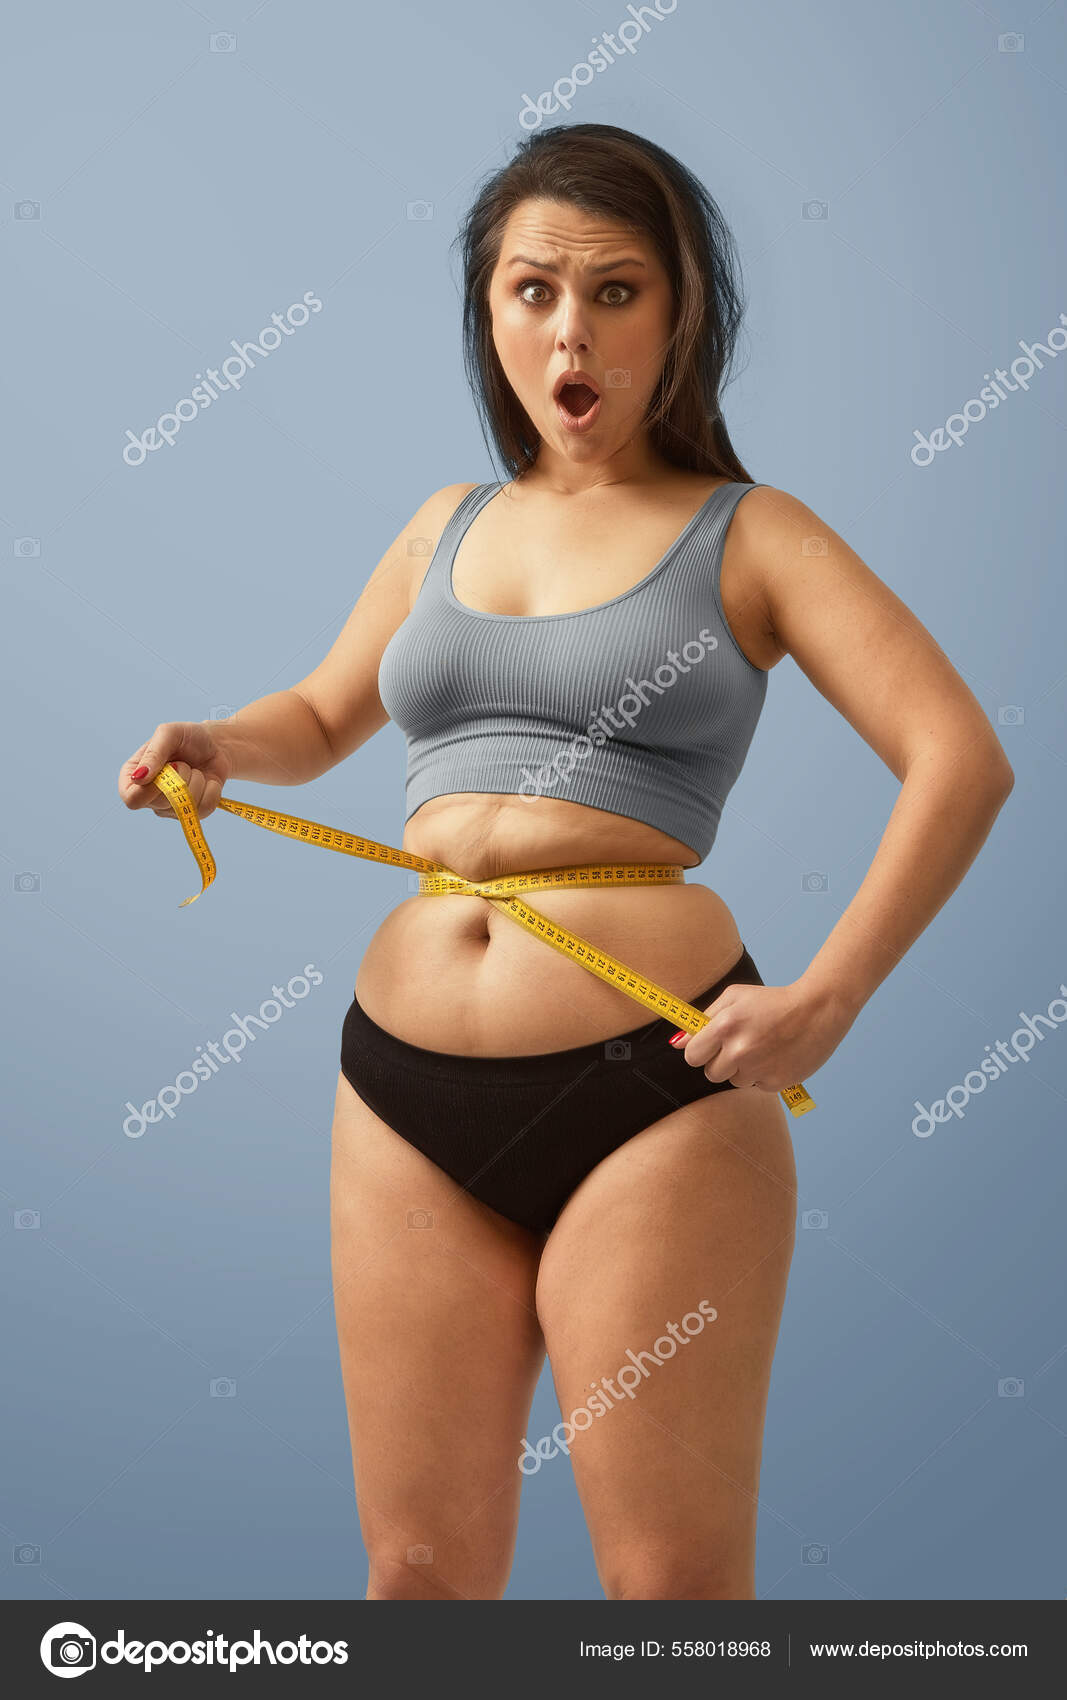 a guy with a big belly and a slim girl measuring waist measuring tape on a  white background Stock Photo